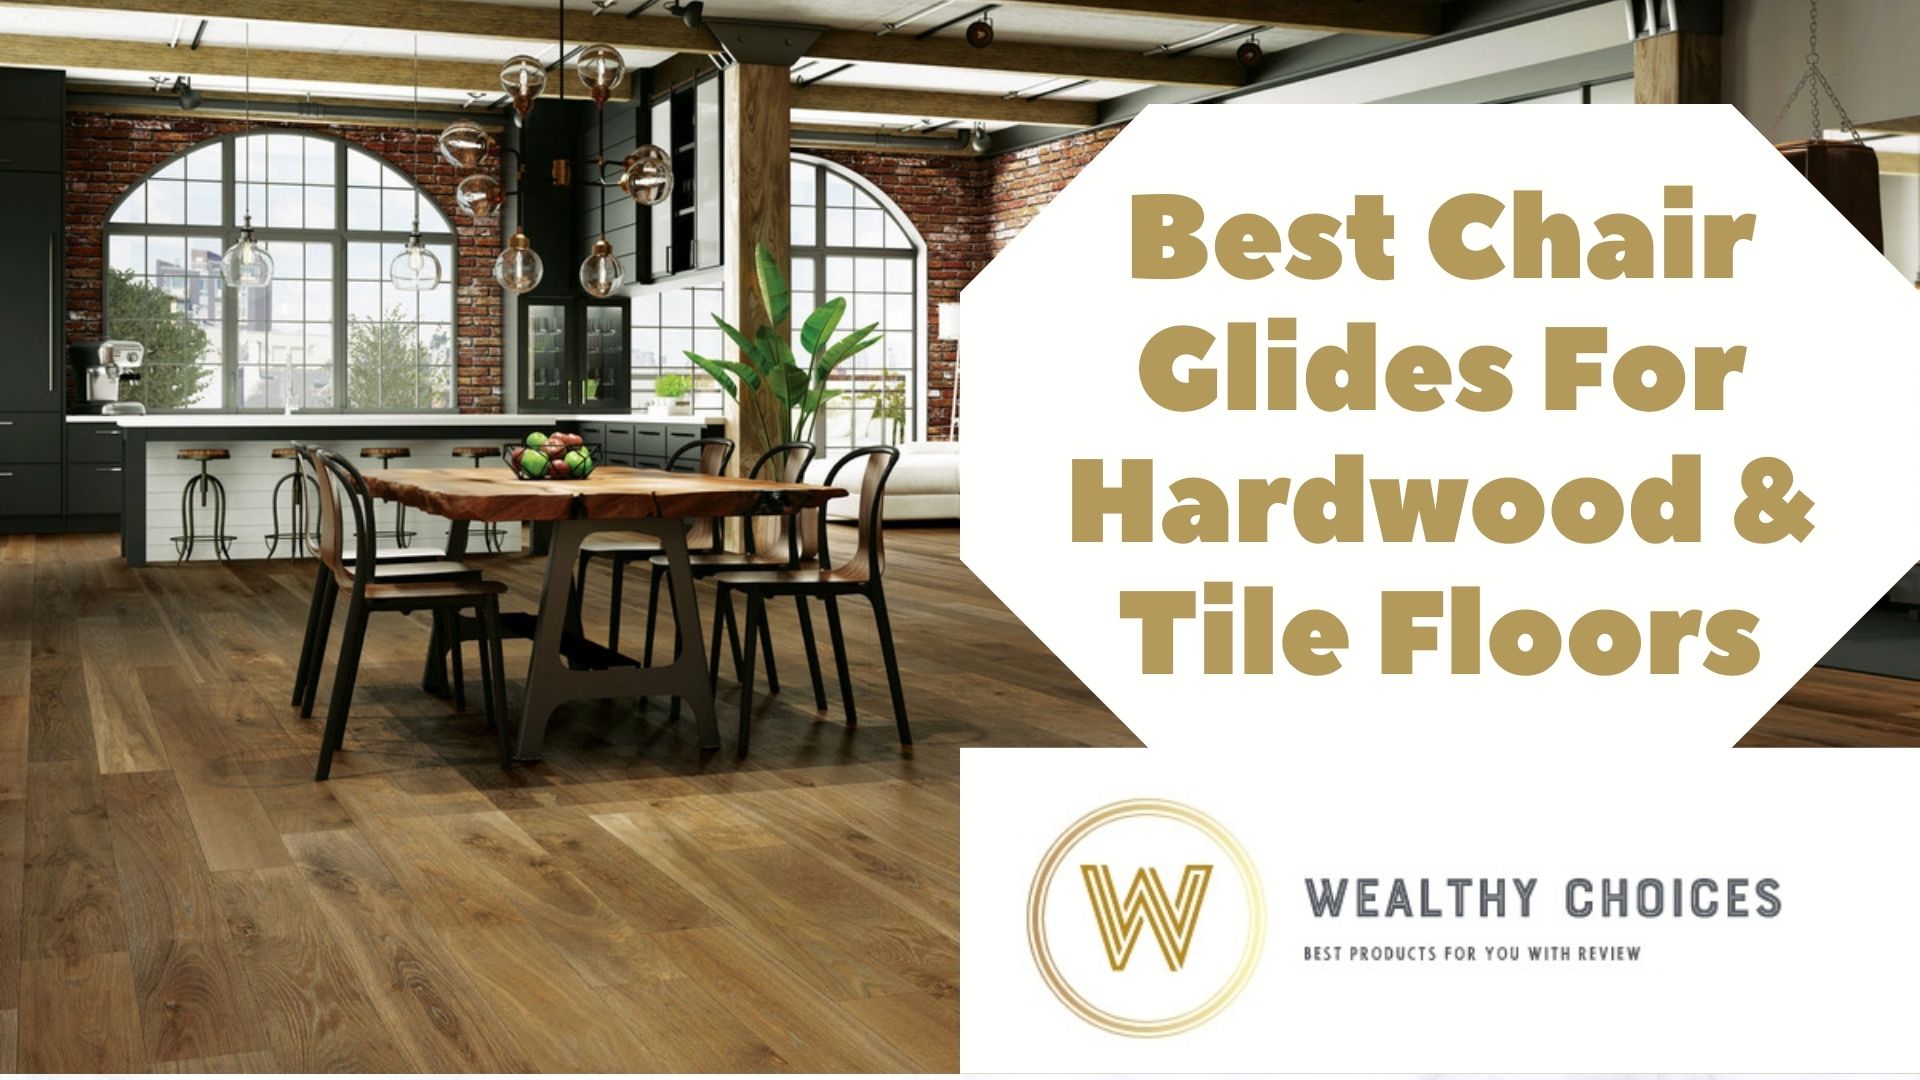 Best Chair Glides For Hardwood Tile, Best Chair Glides For Hardwood Floors